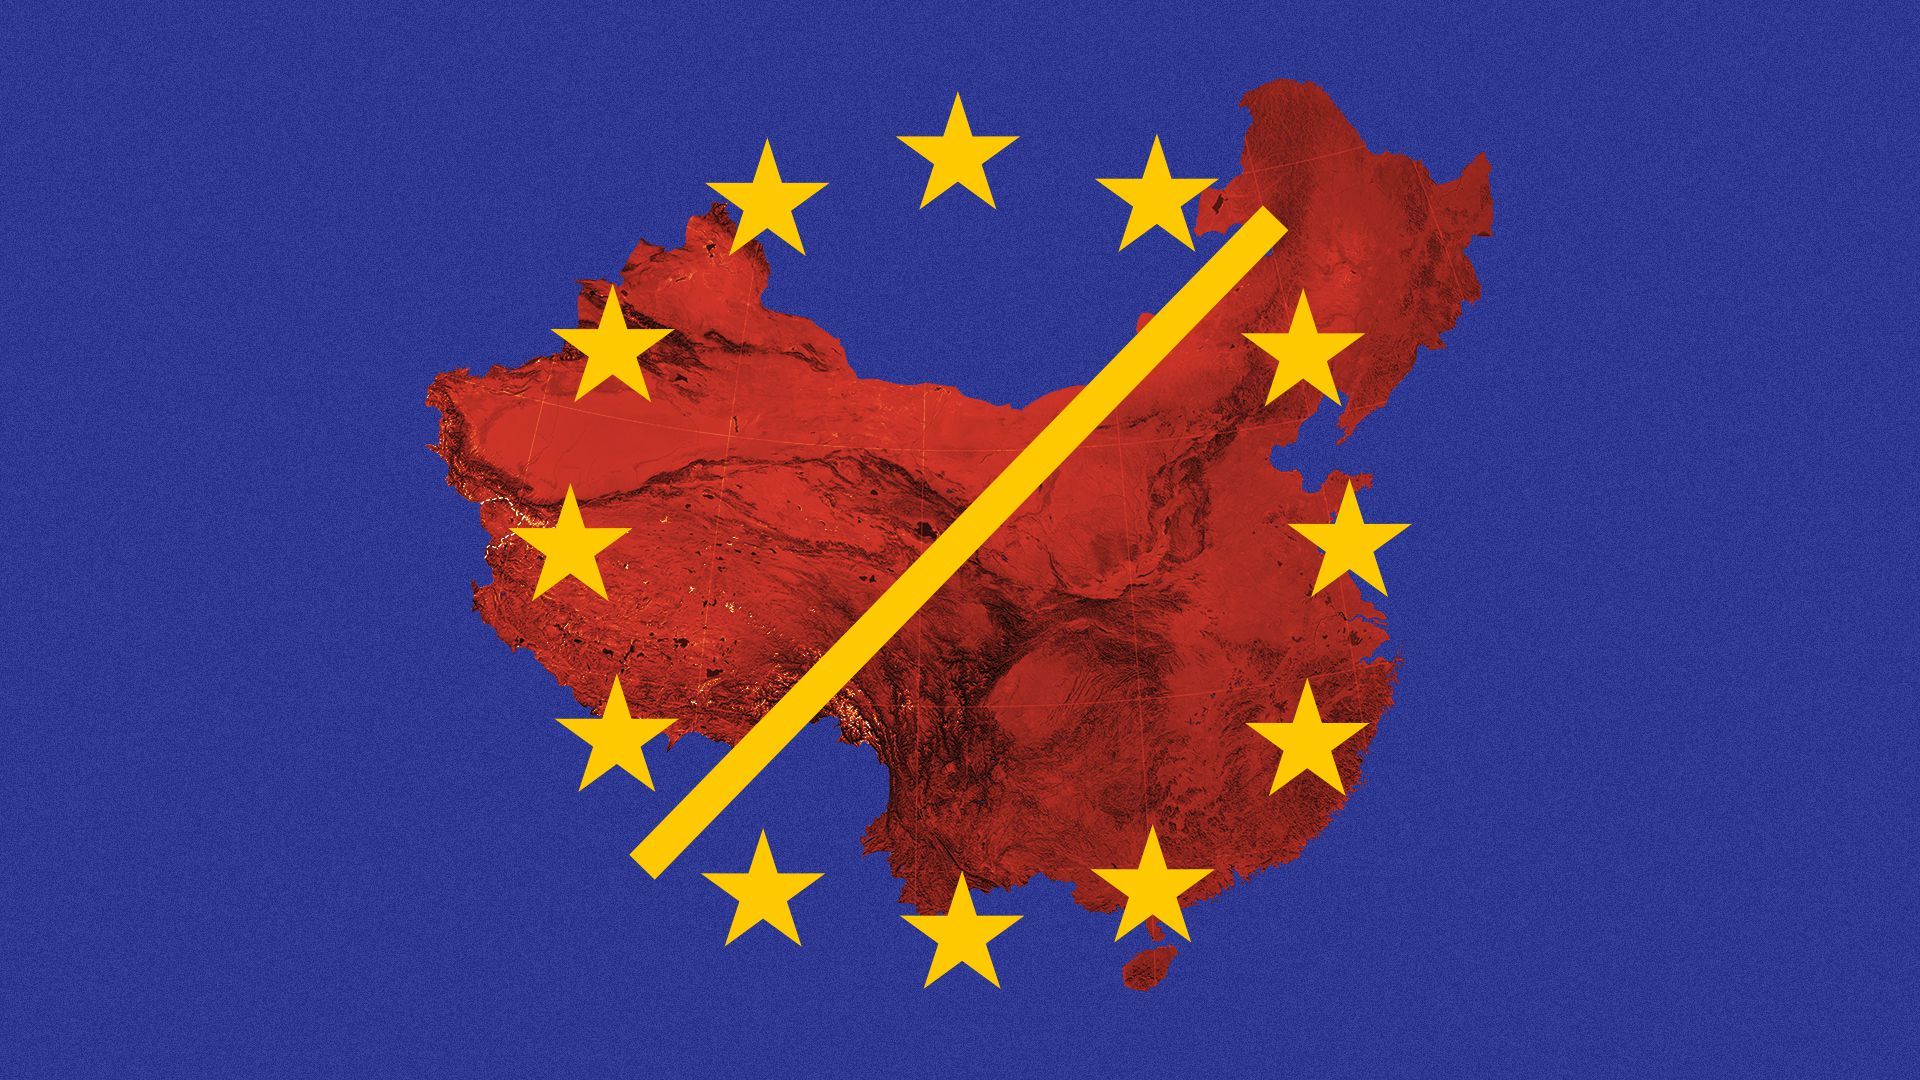 Illustration of the EU stars arranged as a no sign over a map of China.